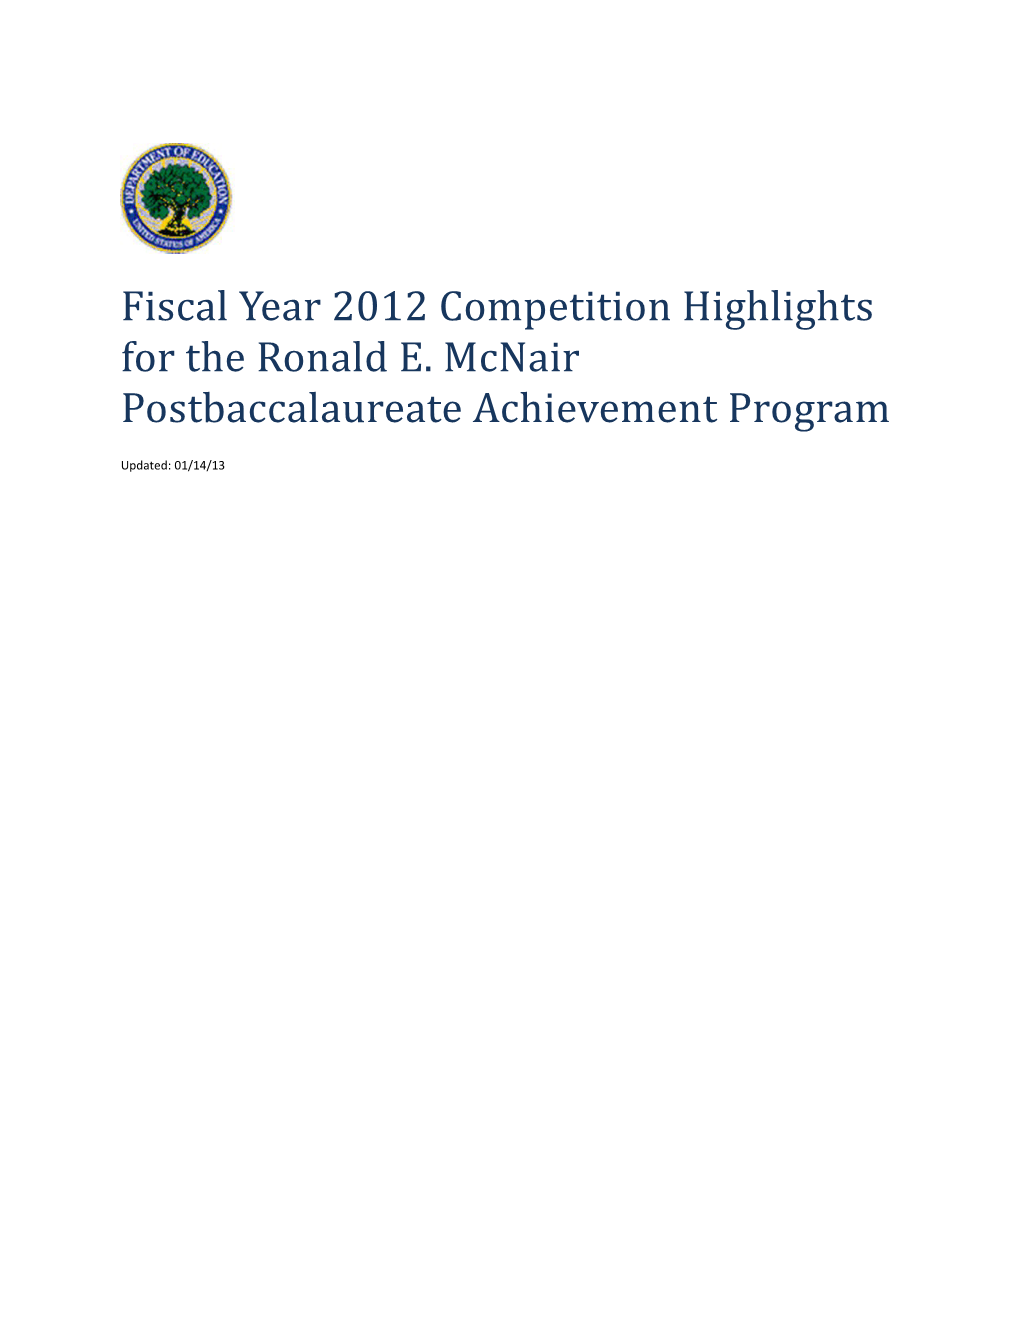 FY 2012 Competition Highlights for the Ronald Mcnair Postbaccalaureate Achievement Program